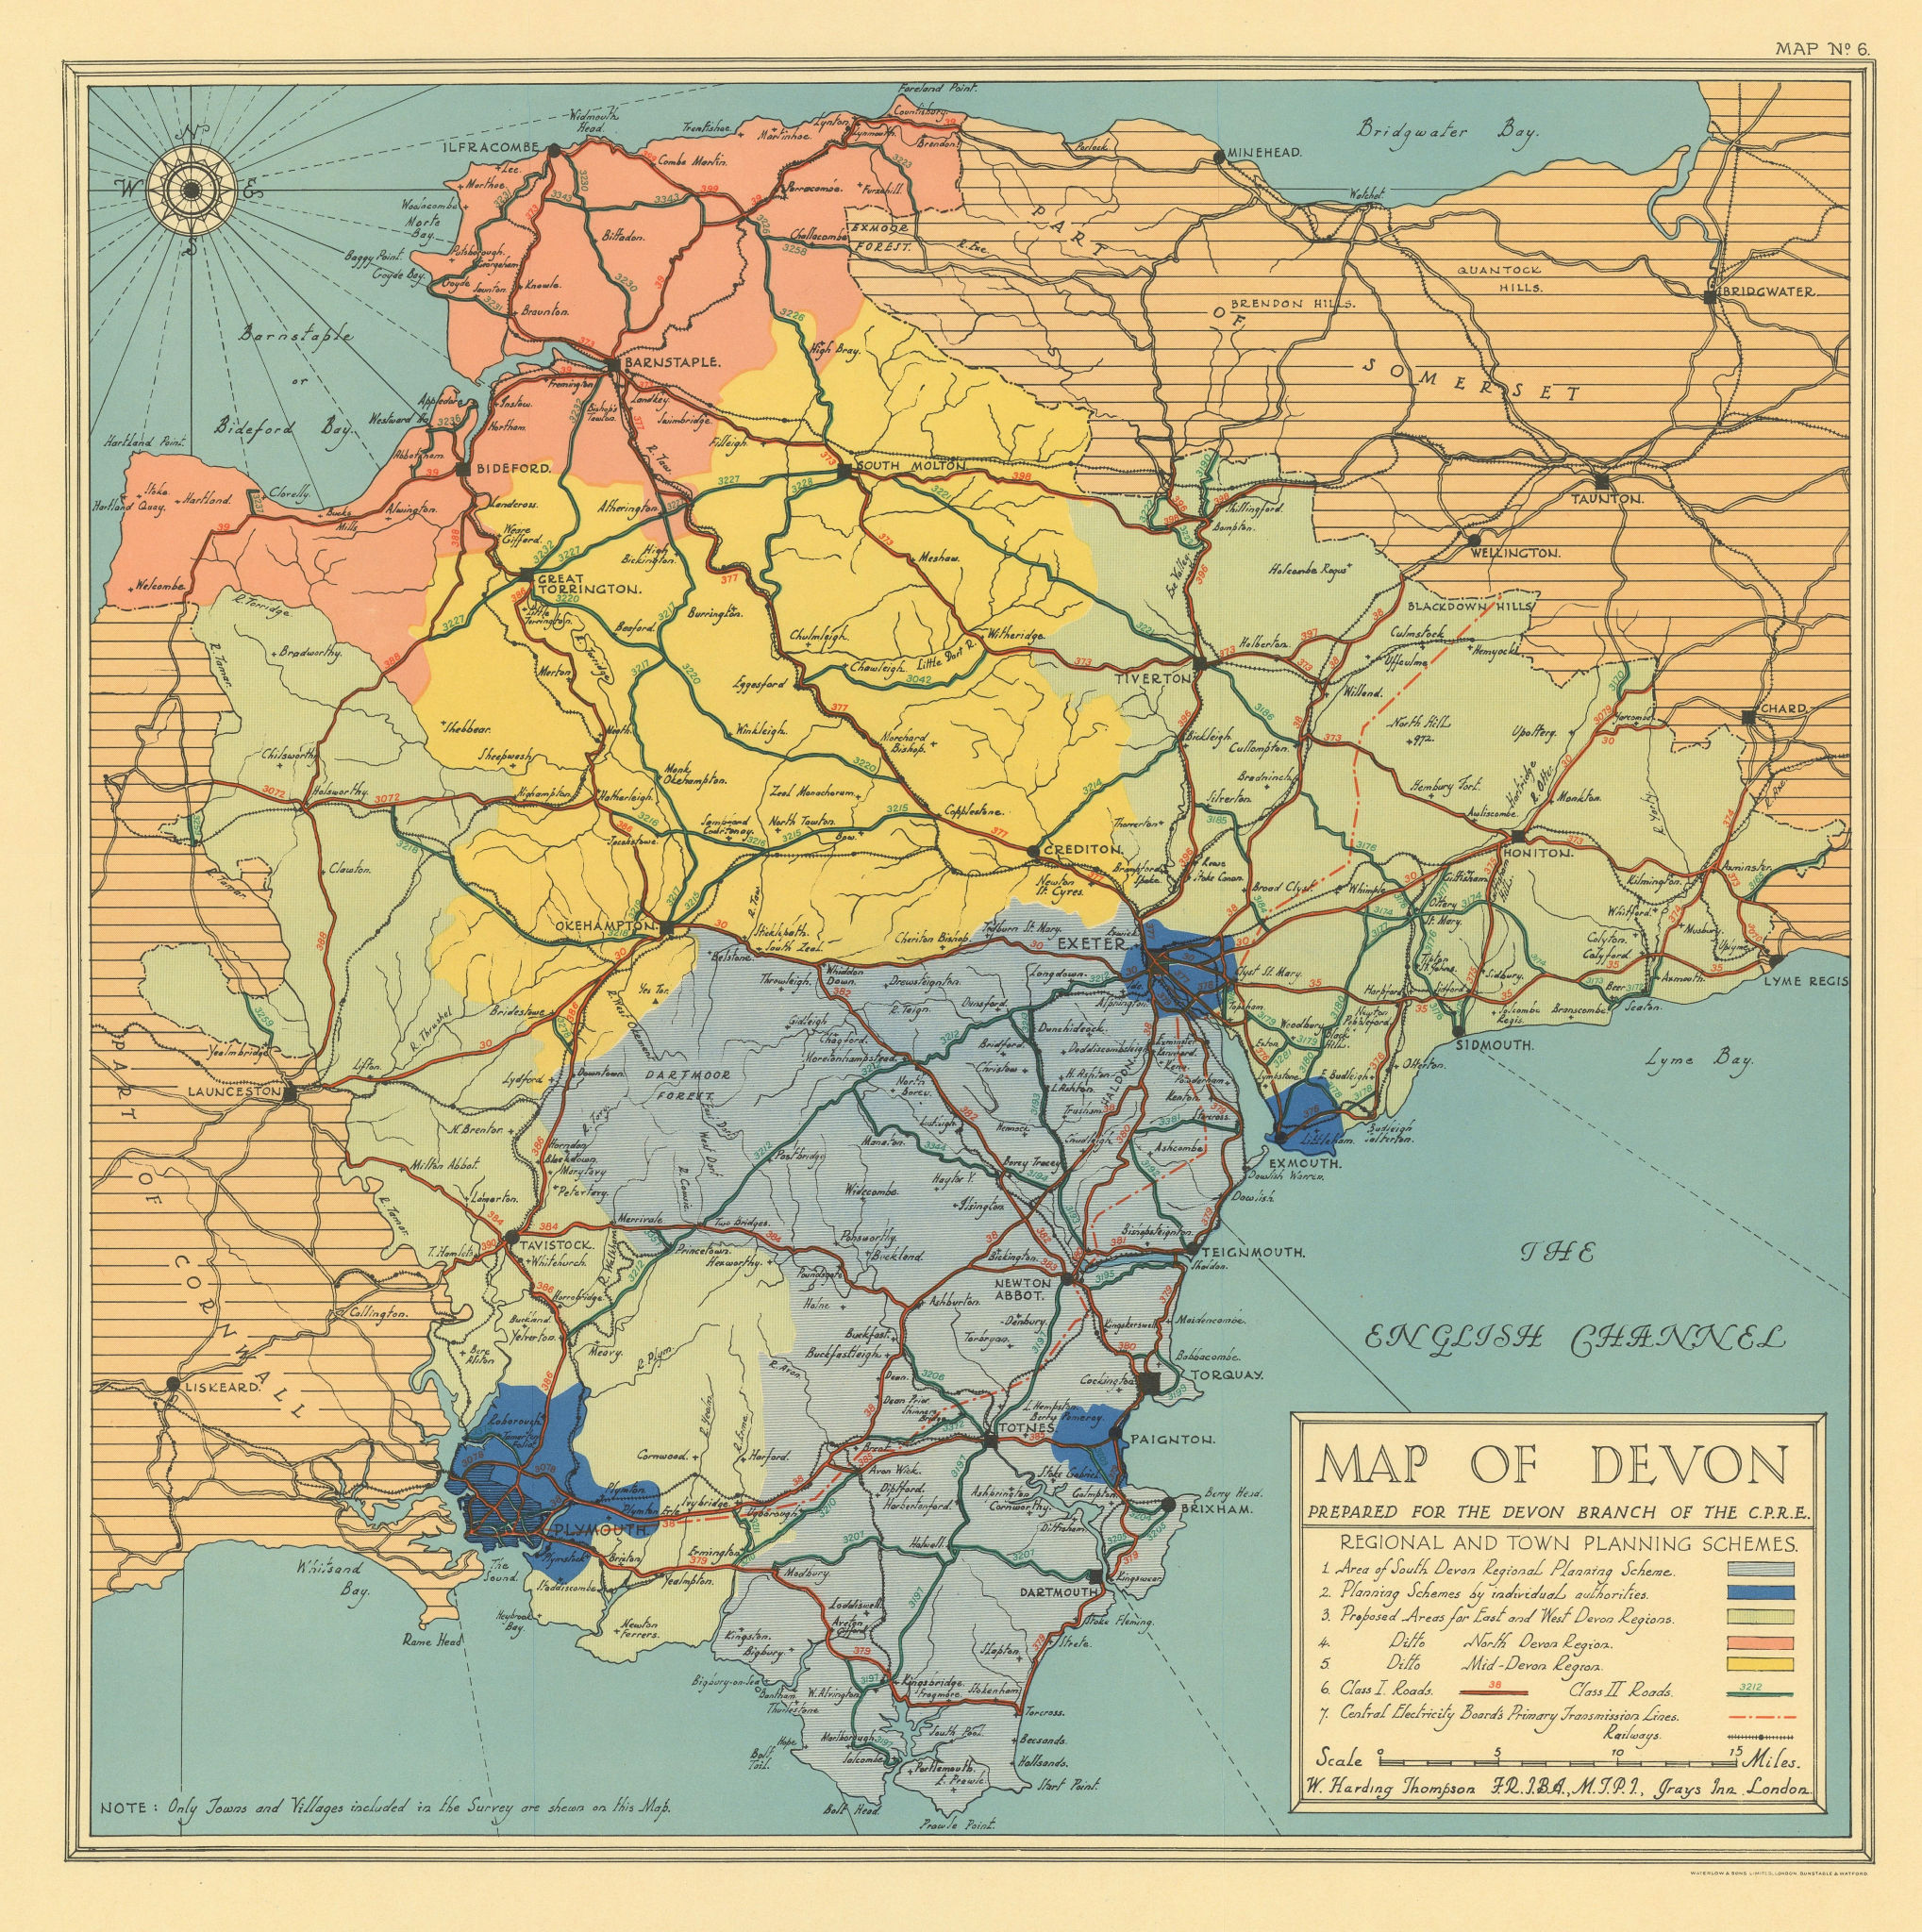 Associate Product Devon regional & town planning schemes for CPRE by W. Harding Thompson 1932 map